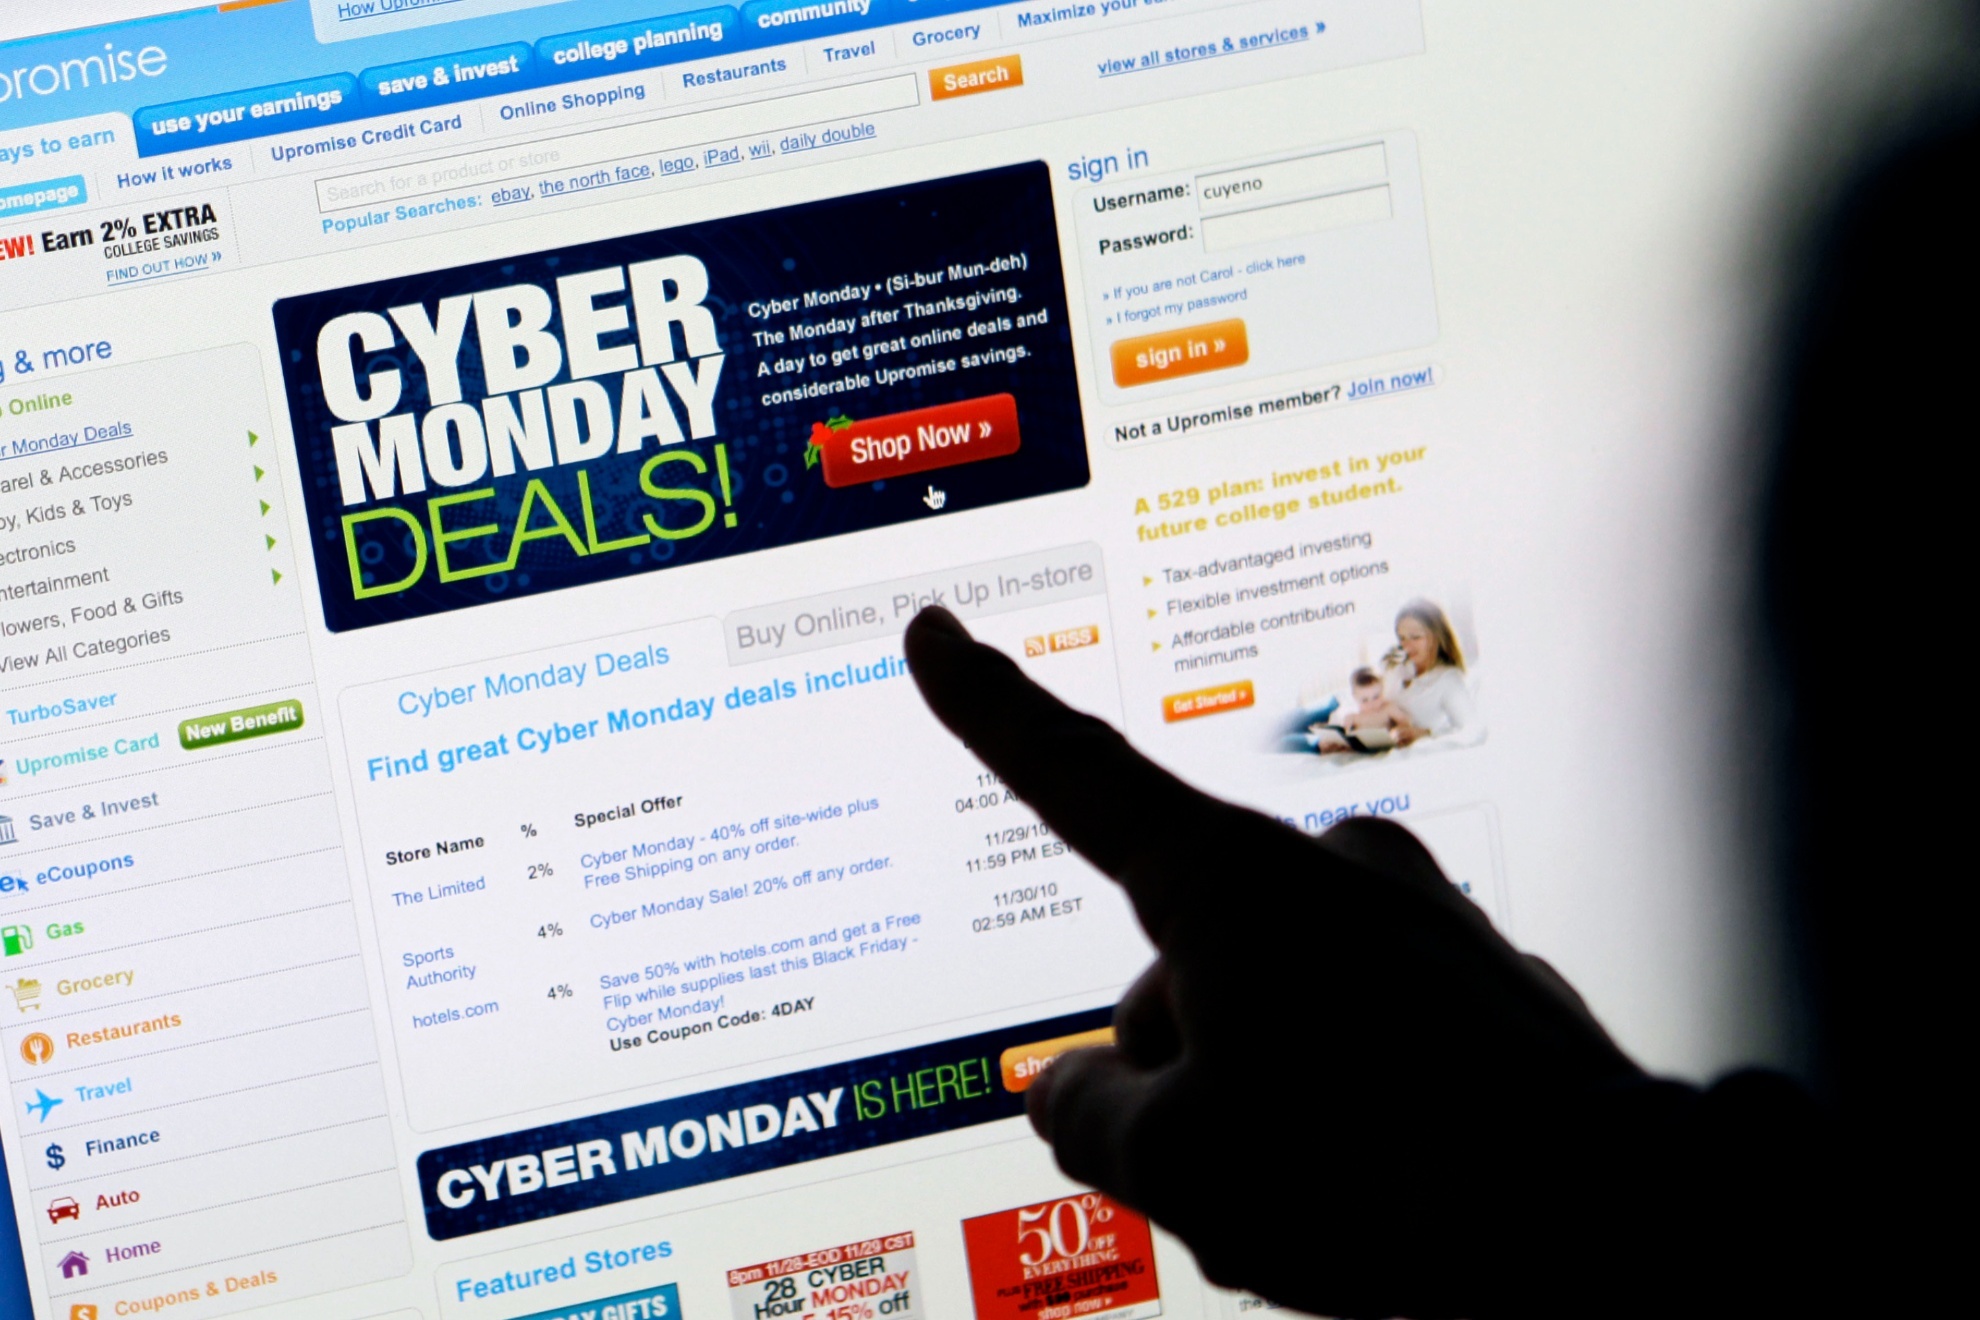 Everything is ready for this year's Cyber Monday.